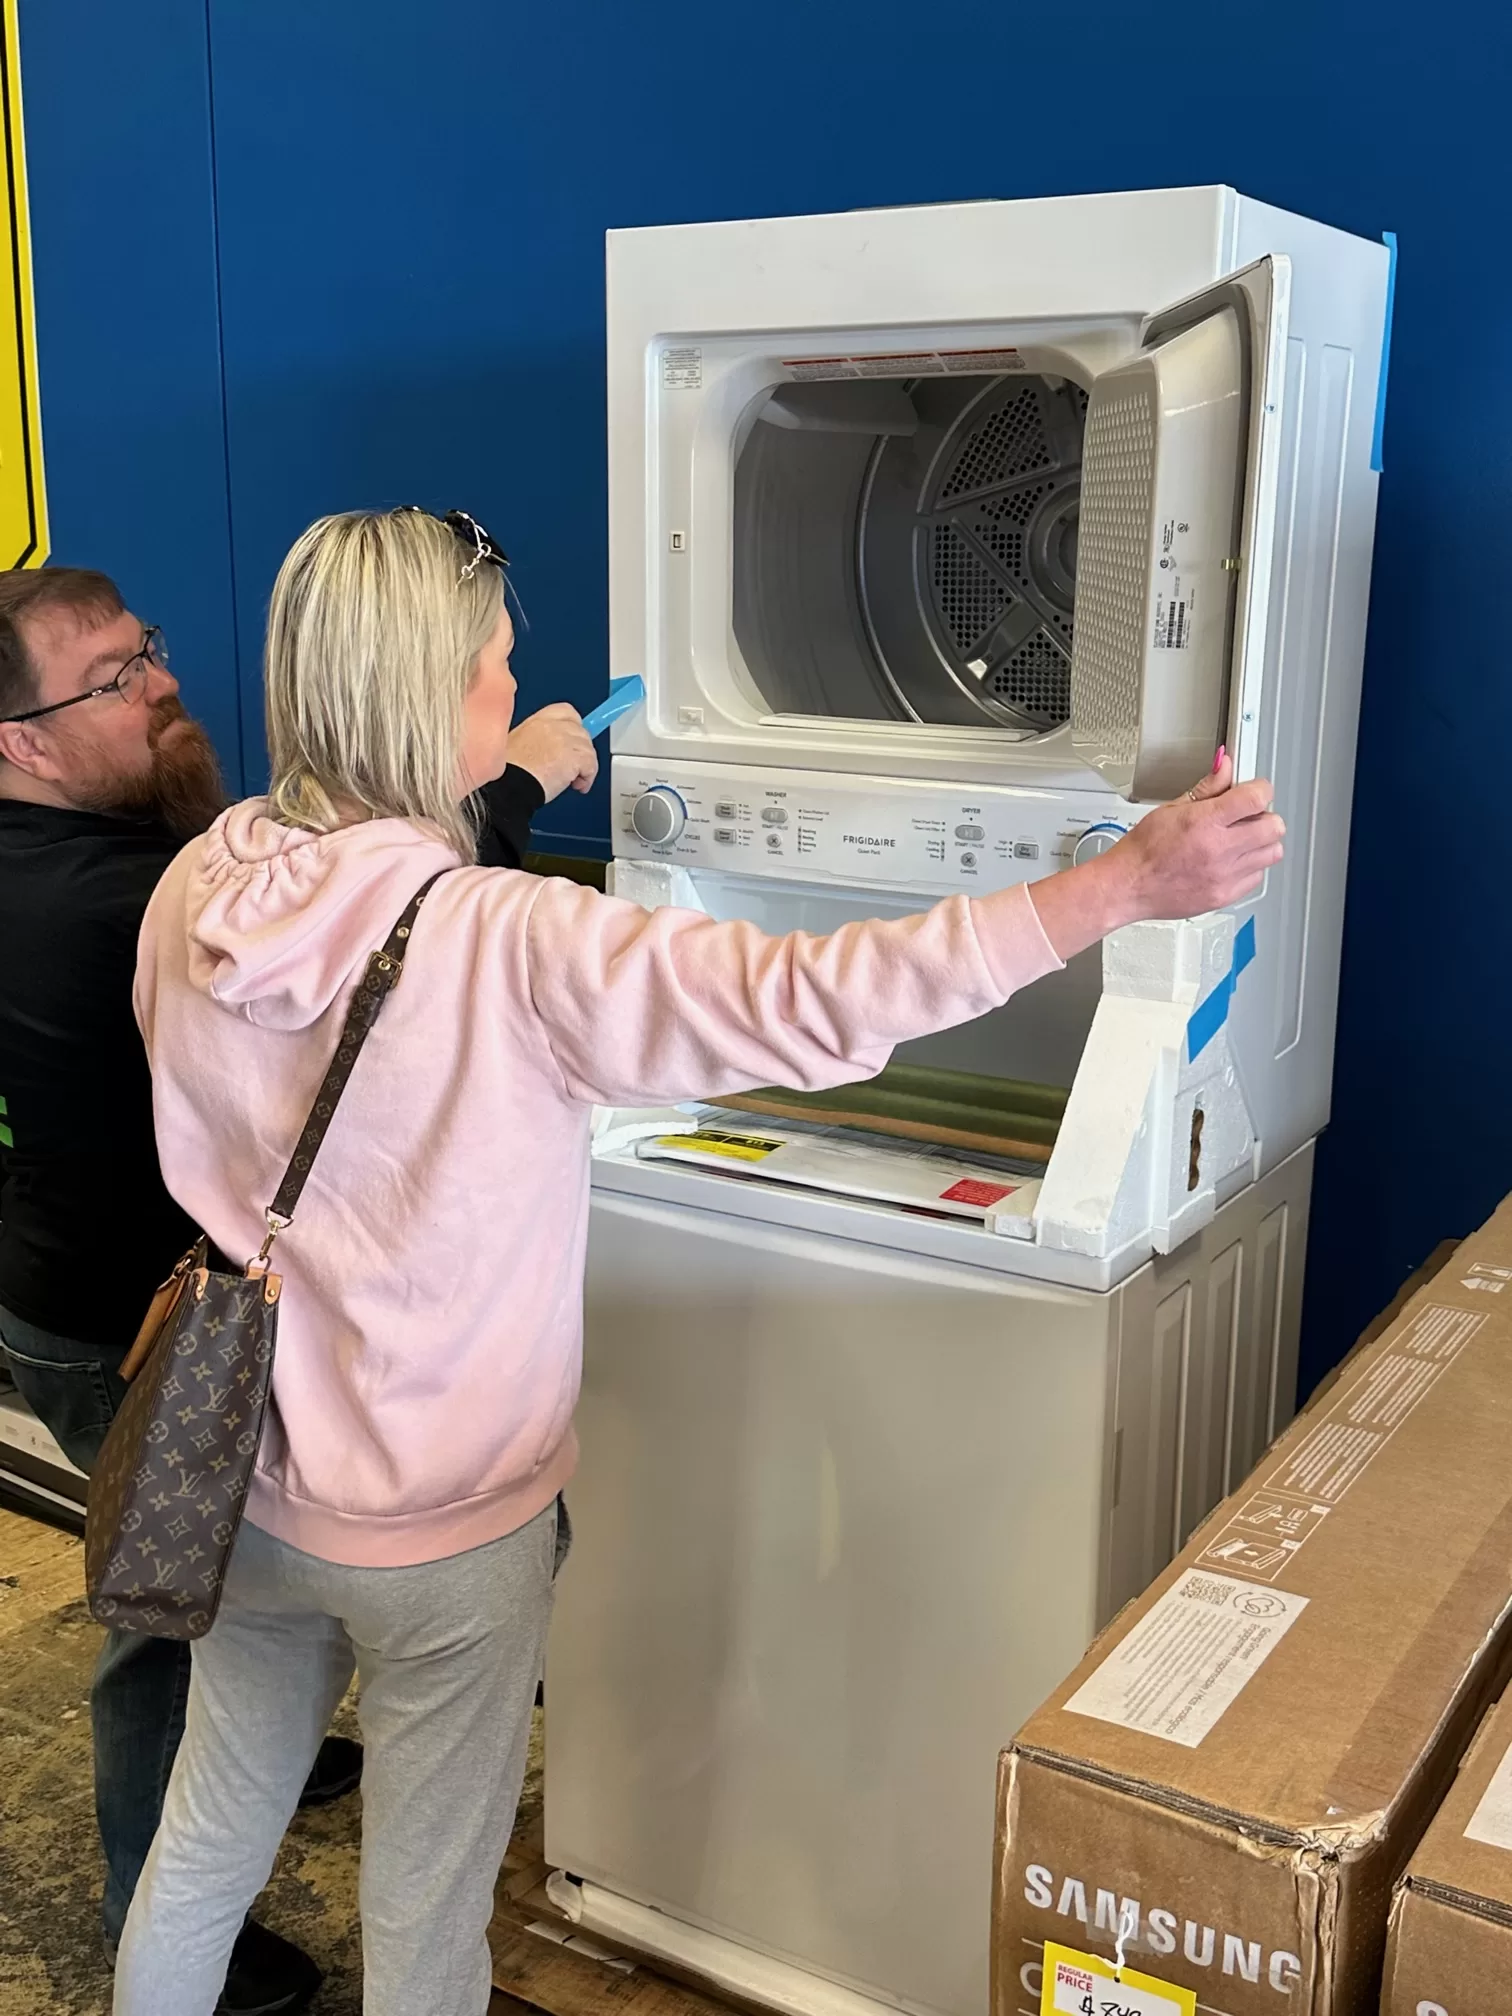 Customers Inspecting an Upright Washer/Dryer Appliance at Our TV, Appliance and Bin Store - The Attic of the Quad Cities